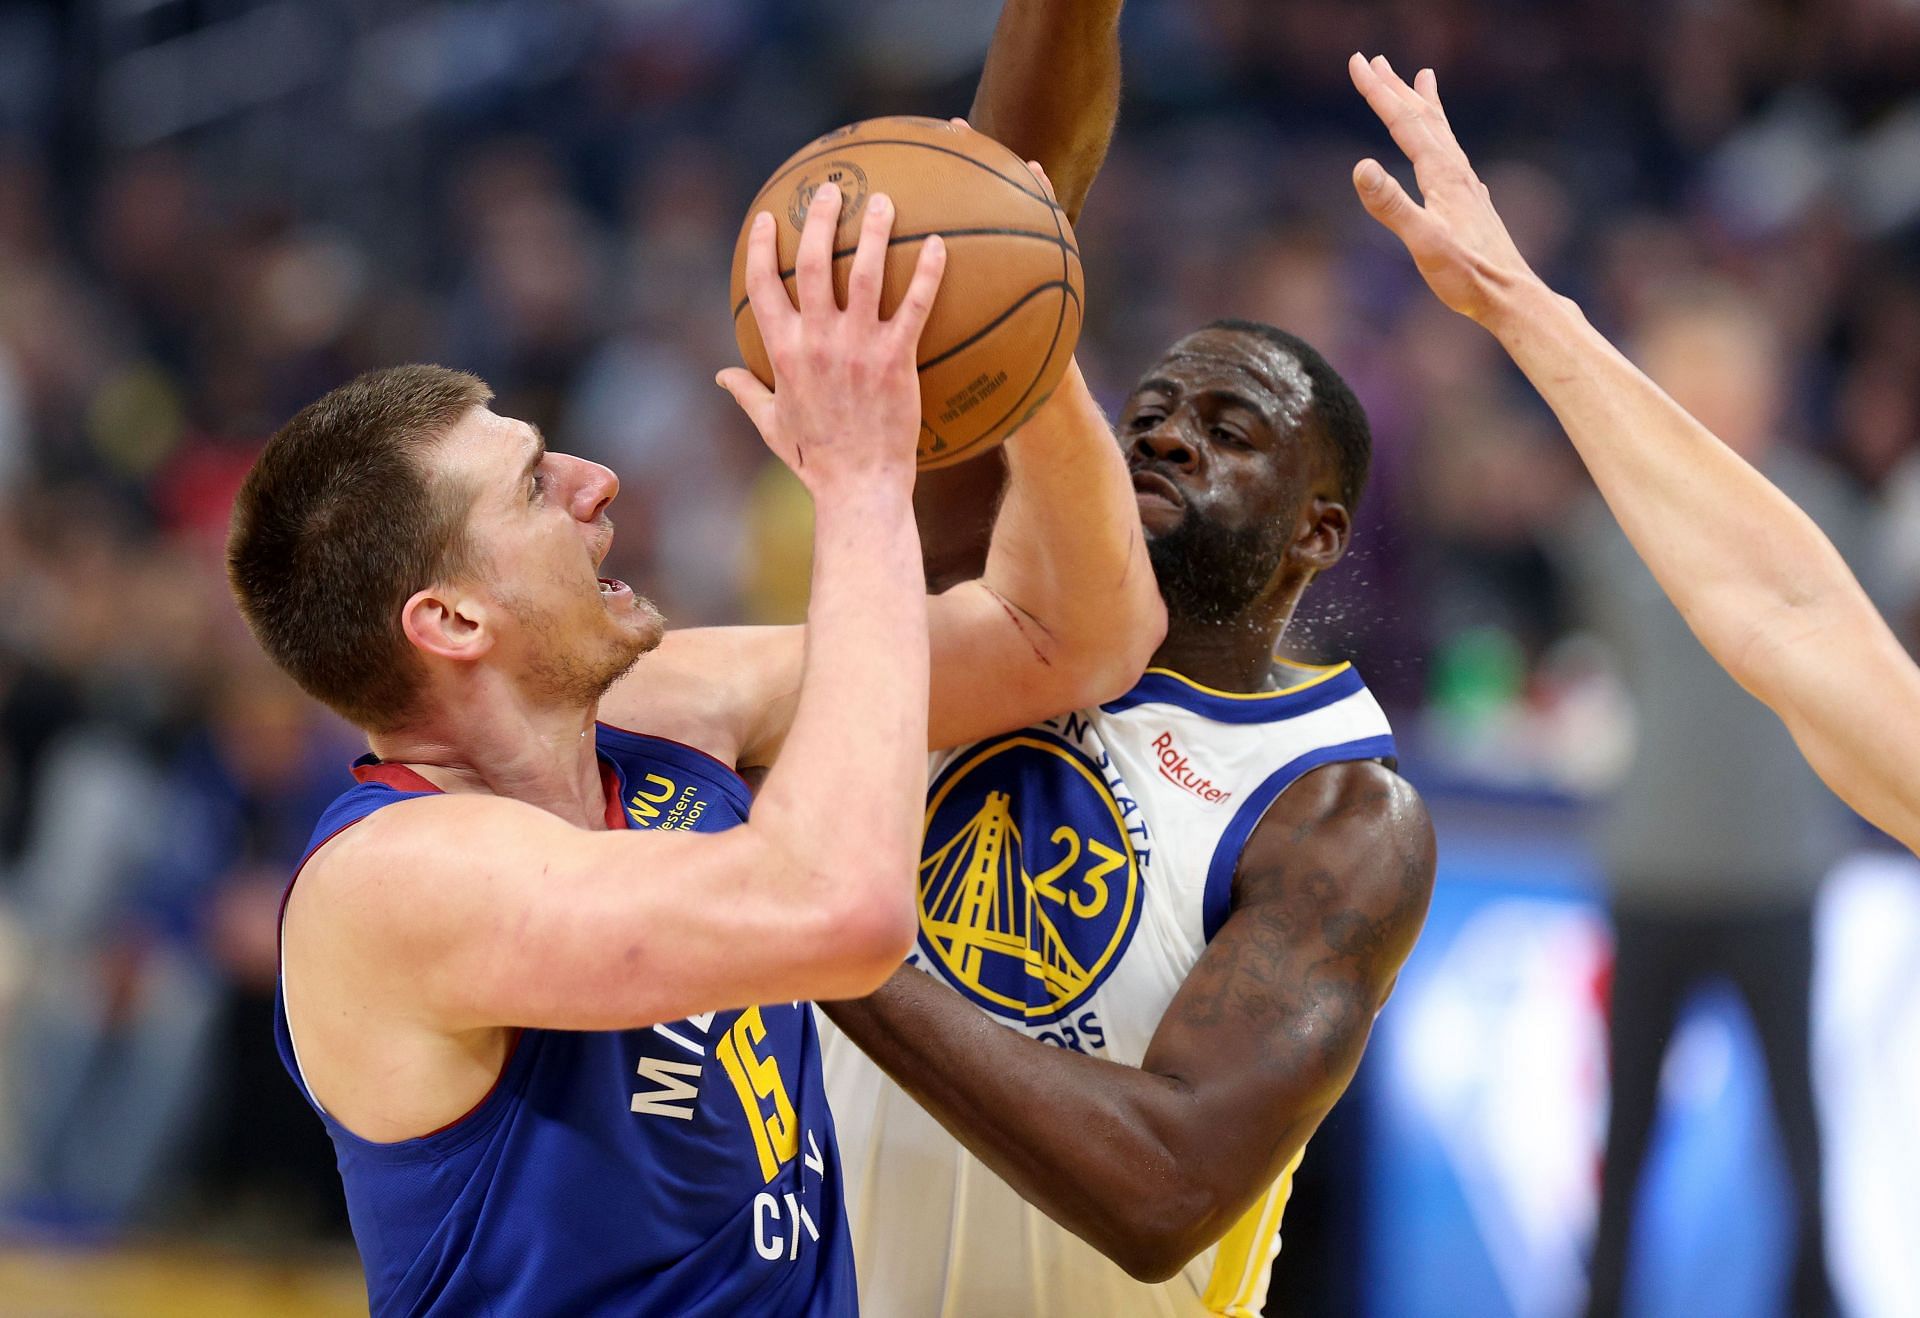 Nikola Jokic No. 15 of the Denver Nuggets shoots over Draymond Green No. 23 of the Golden State Warriors.